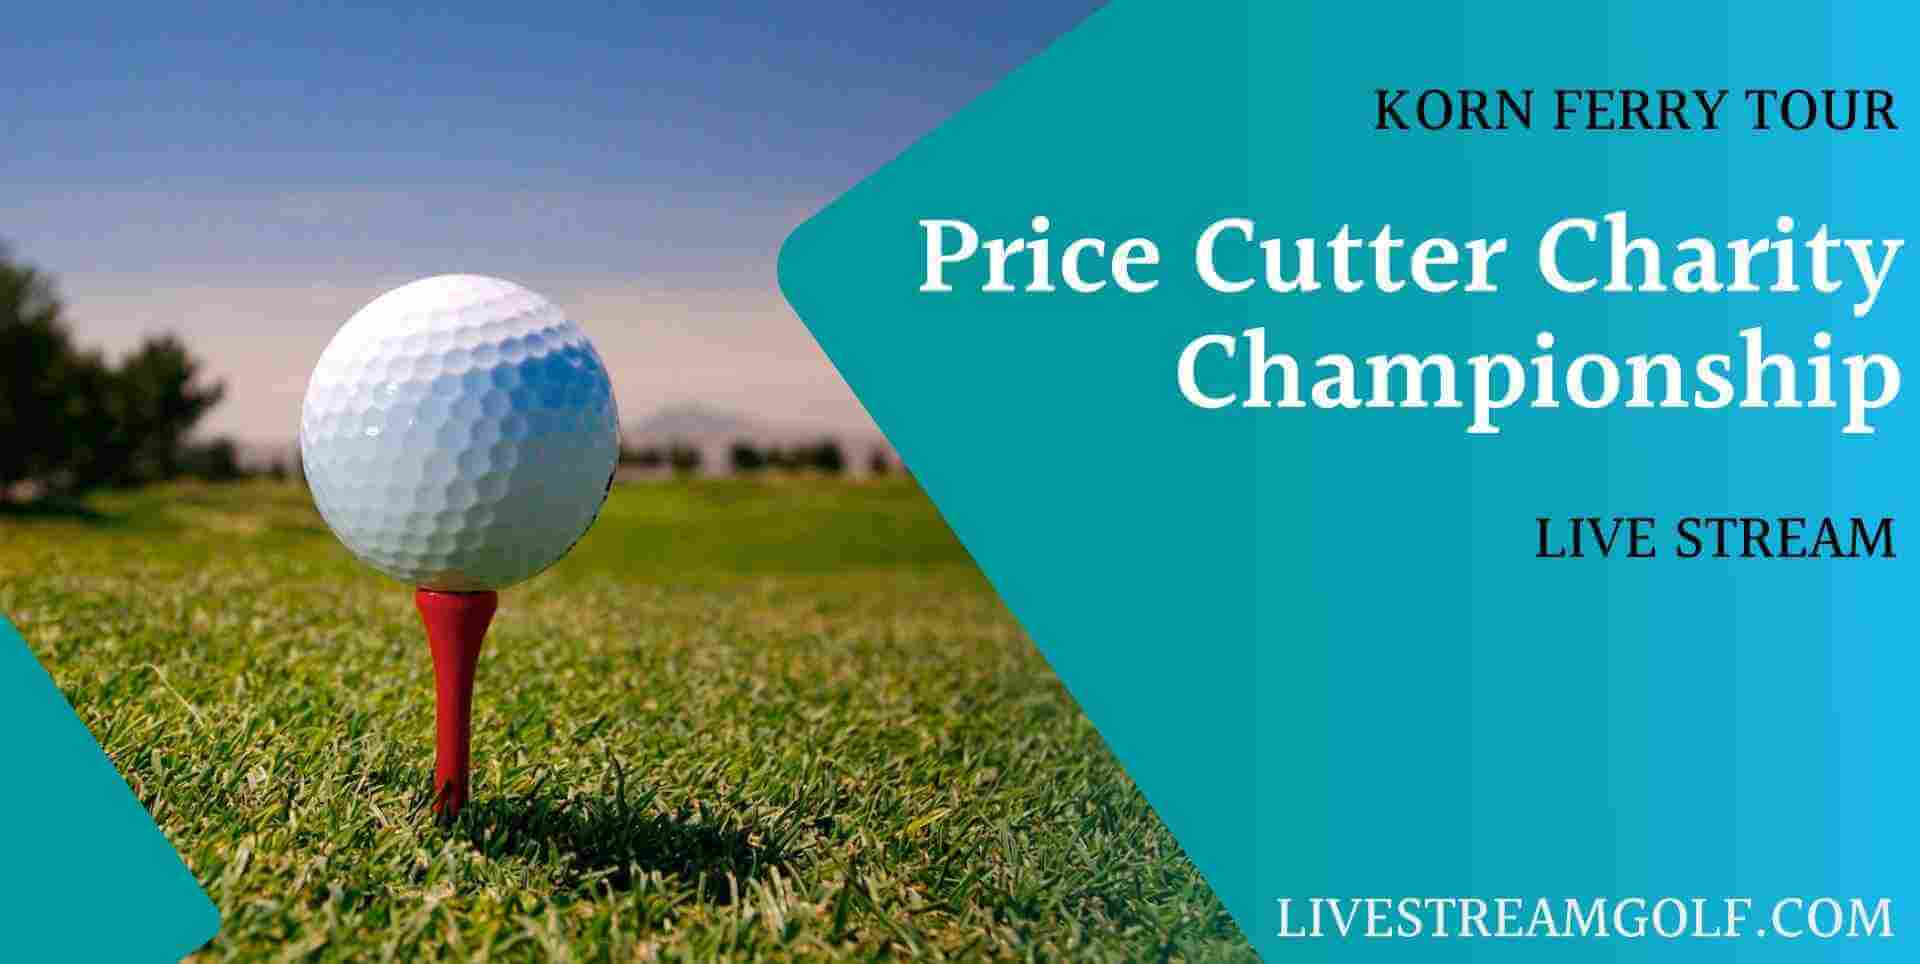 price-cutter-charity-live-streaming-korn-ferry